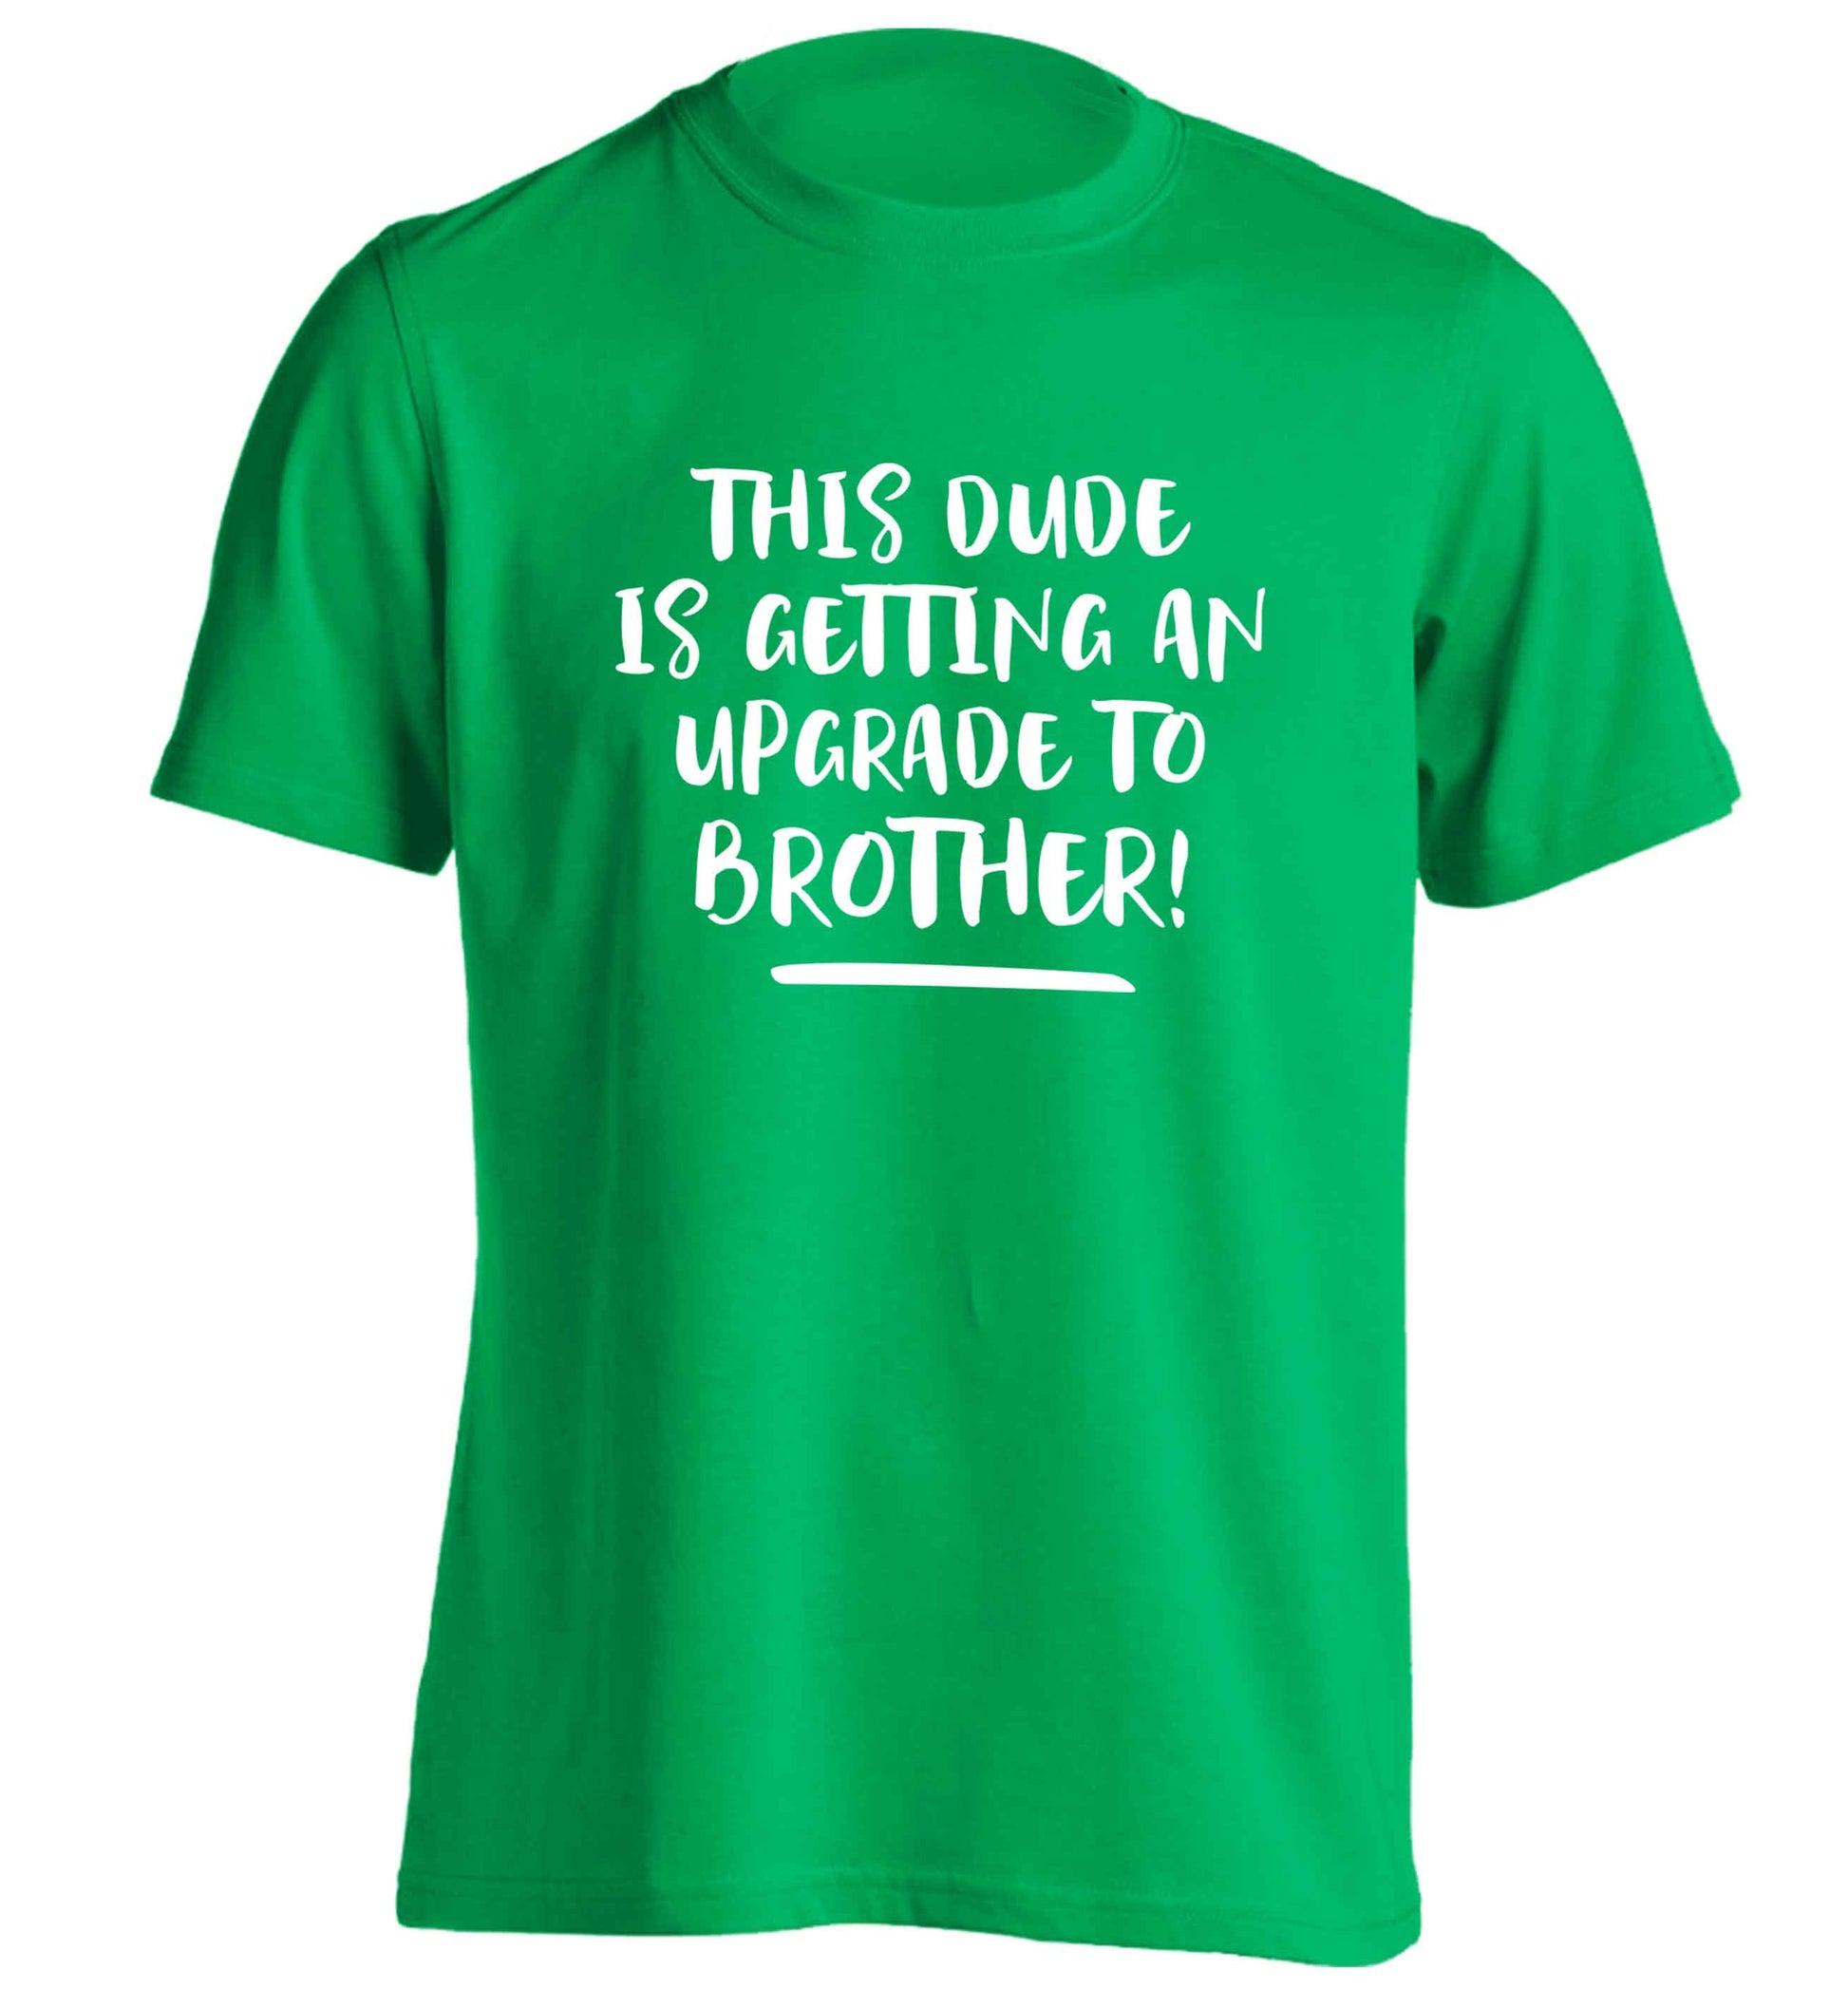 This dude is getting an upgrade to brother! adults unisex green Tshirt 2XL